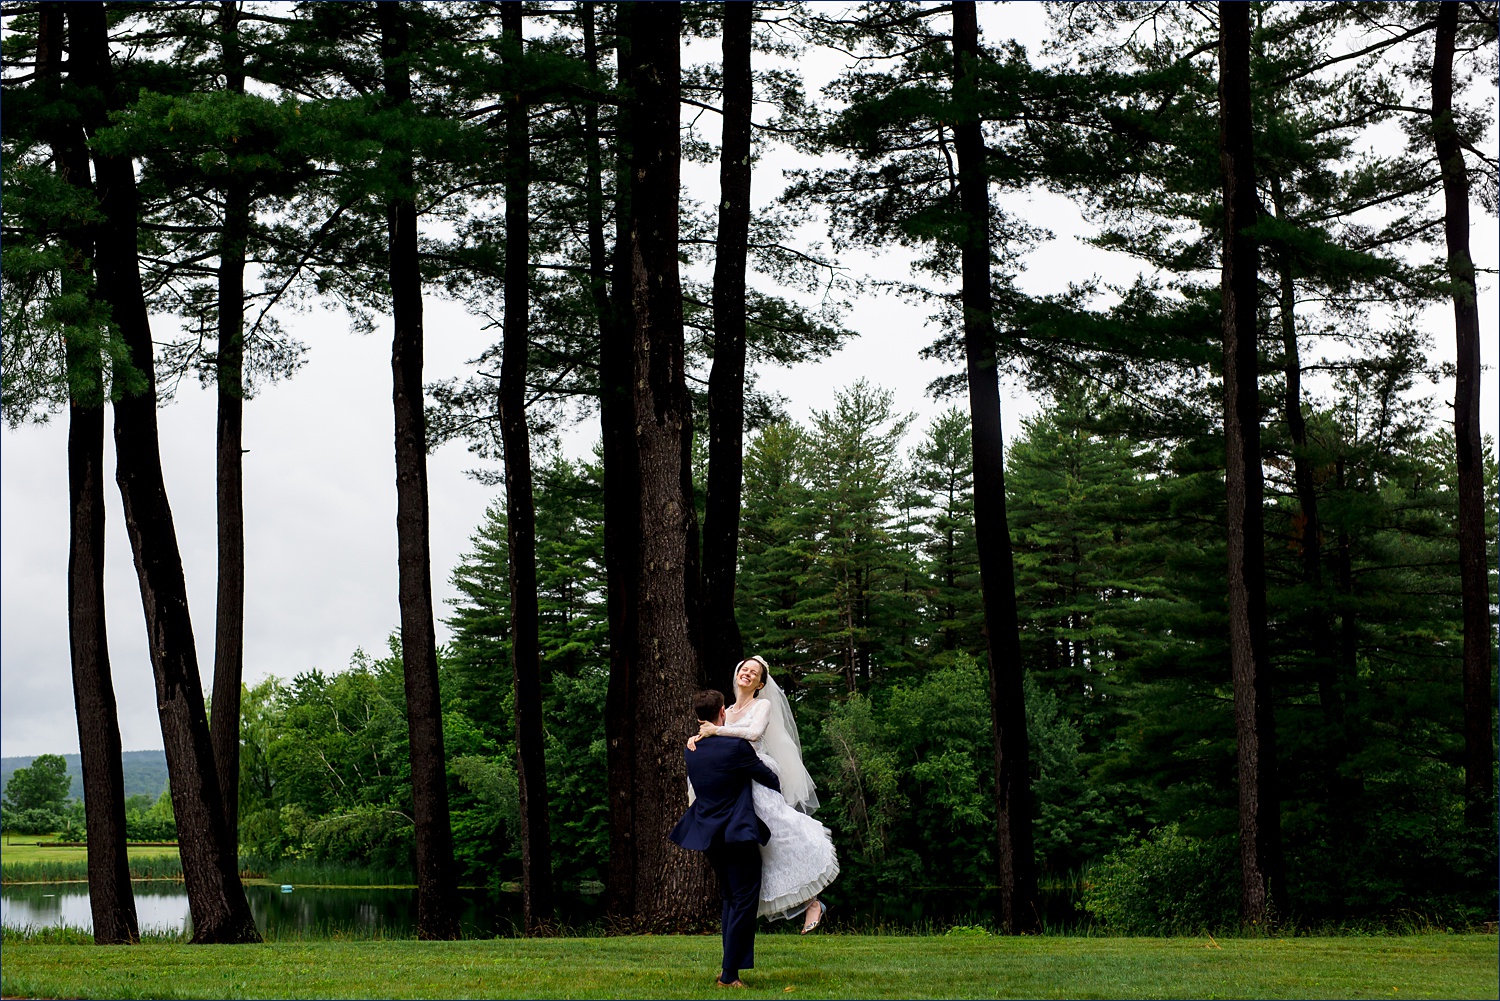 The groom picks up and spins his bride on their White Mountains New Hampshire wedding day